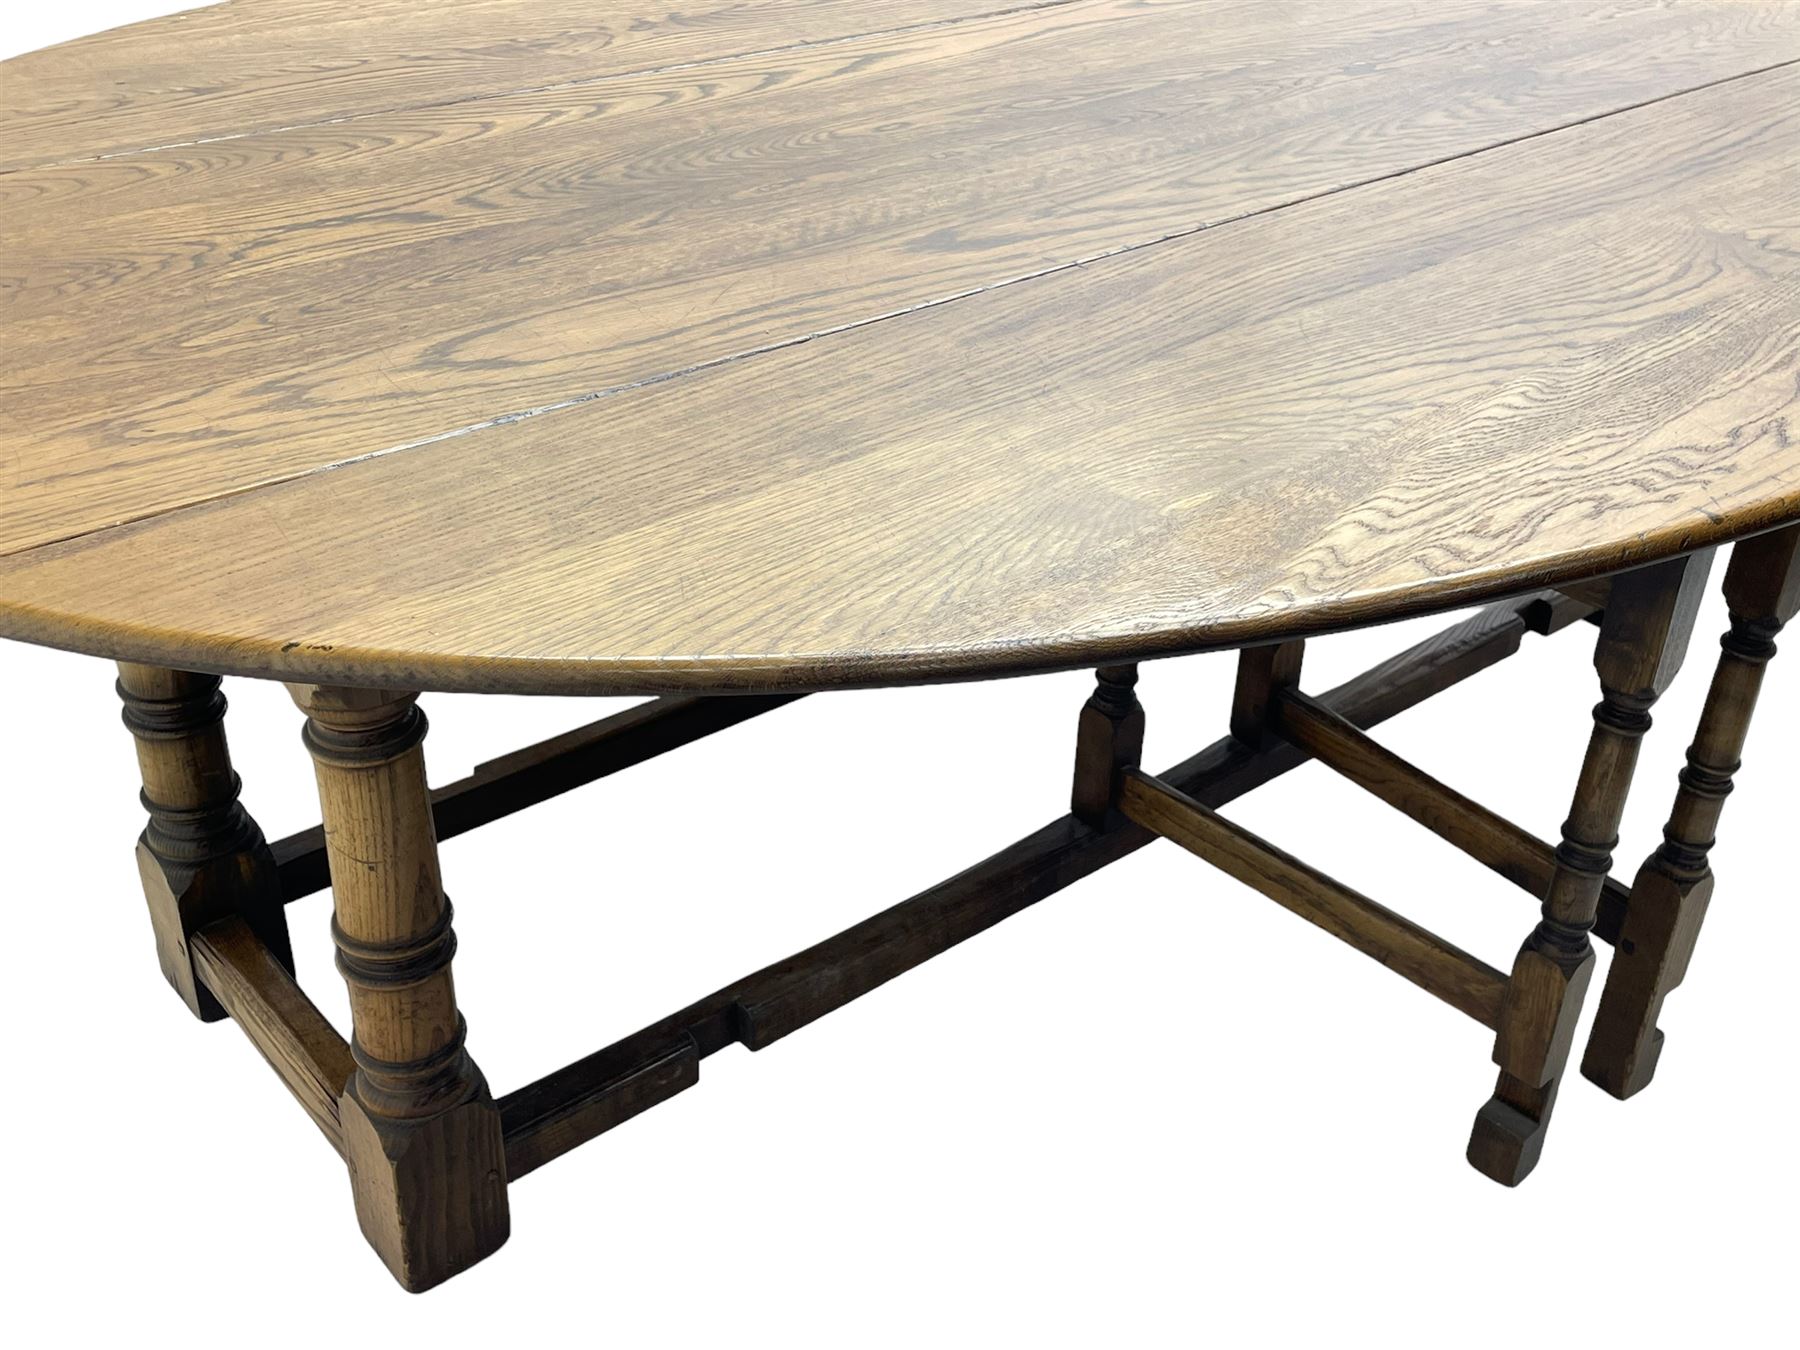 Large 18th century design oak wake or dining table - Image 2 of 12